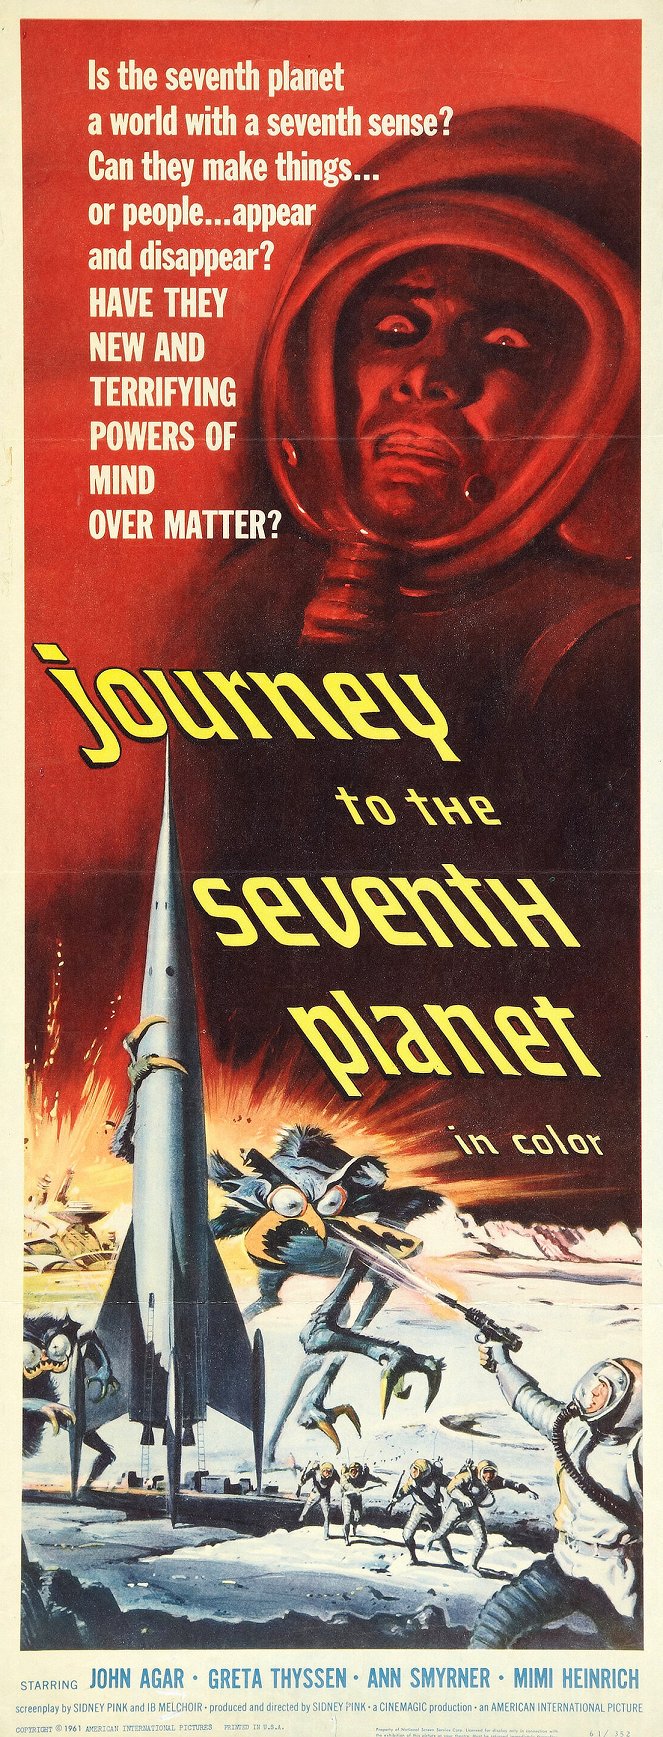 Journey to the Seventh Planet - Julisteet